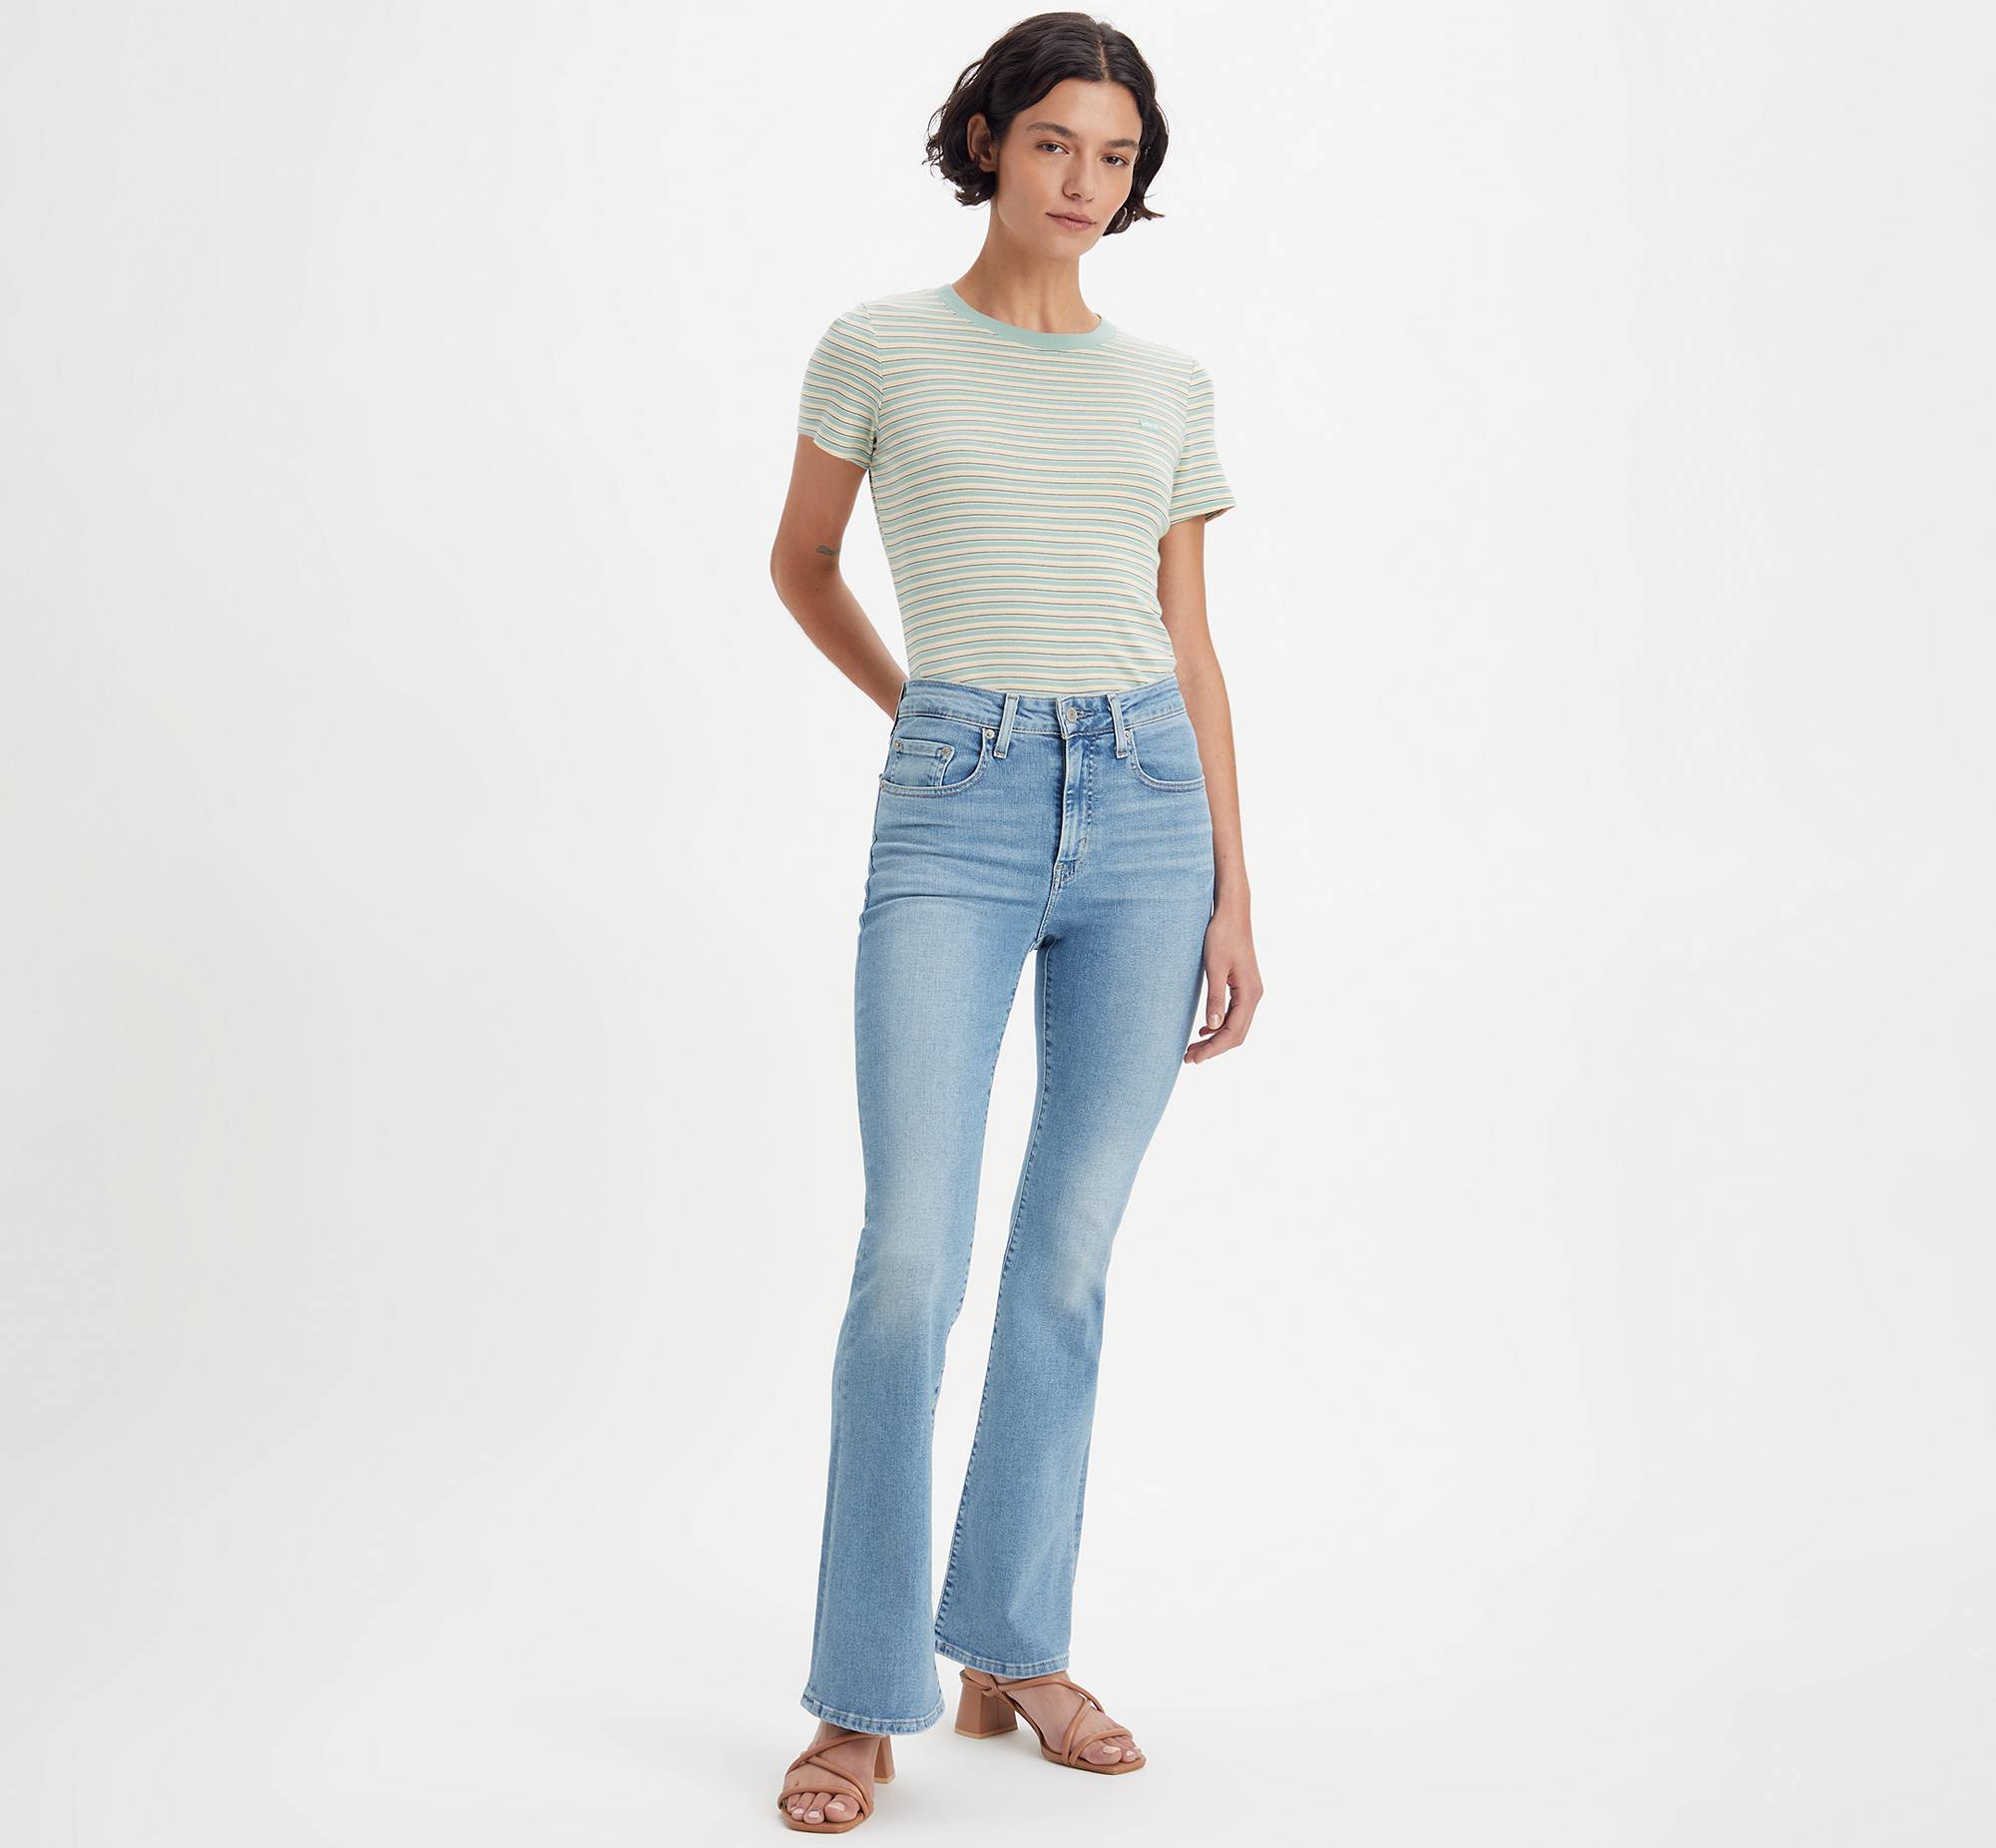 726™ High Rise Flare Jeans 6